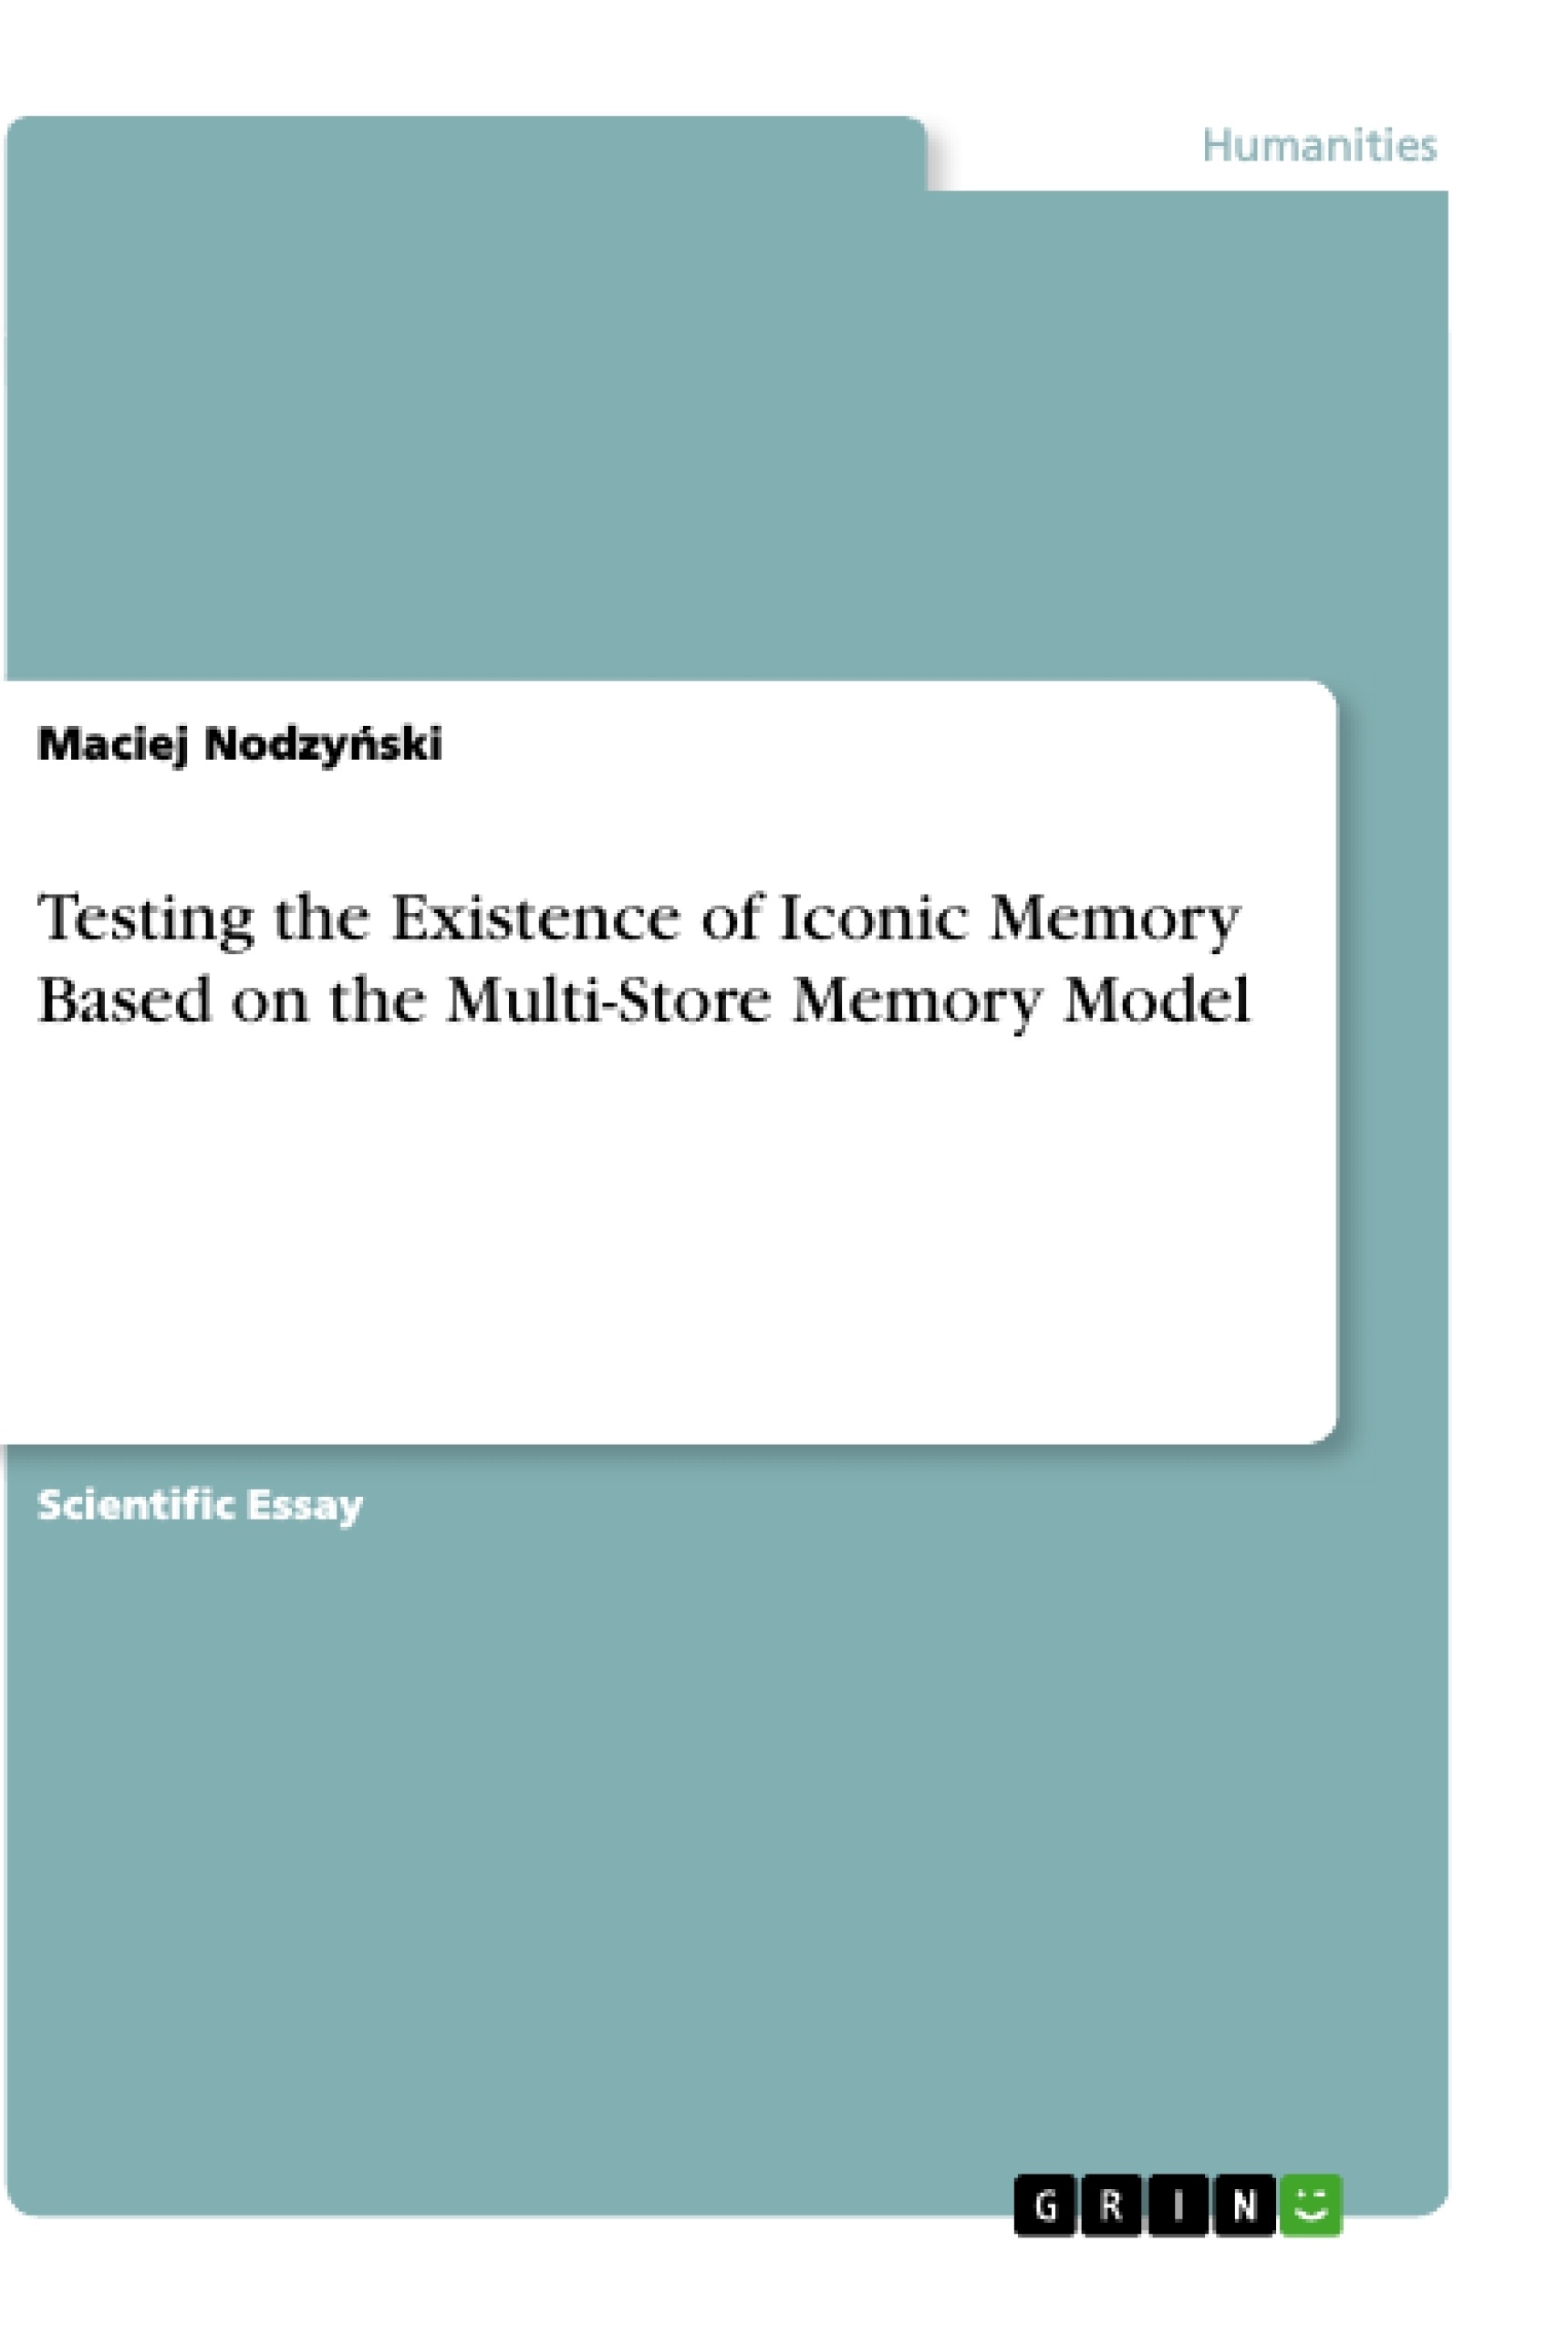 Title: Testing the Existence of Iconic Memory Based on the Multi-Store Memory Model